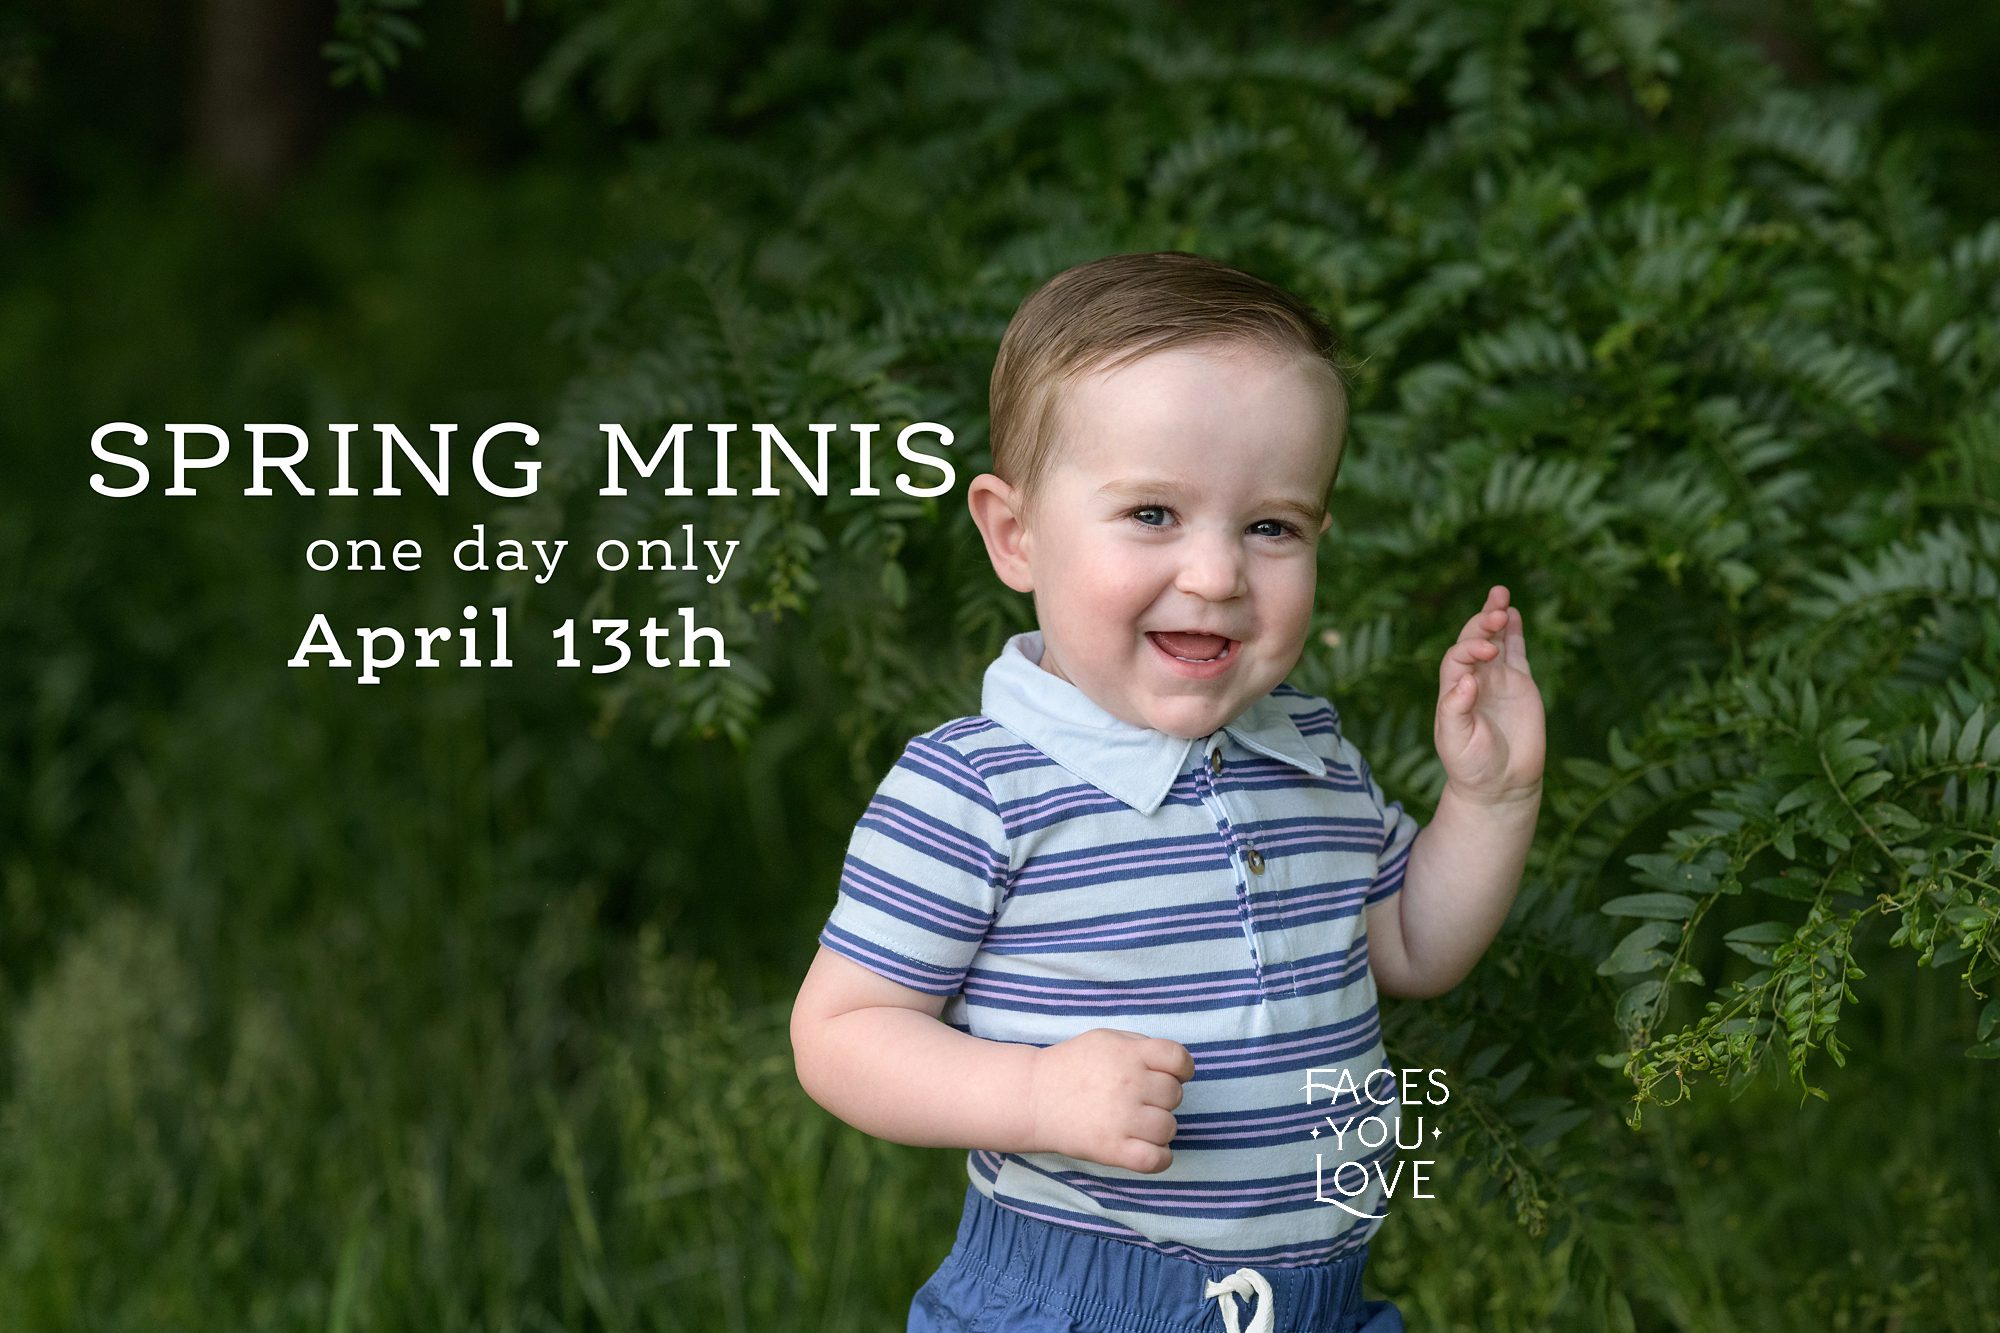 Smiling toddler boy in a green, outdoor setting. Photographed in Leawood, KS by photographer Helen Ransom of Faces You Love.